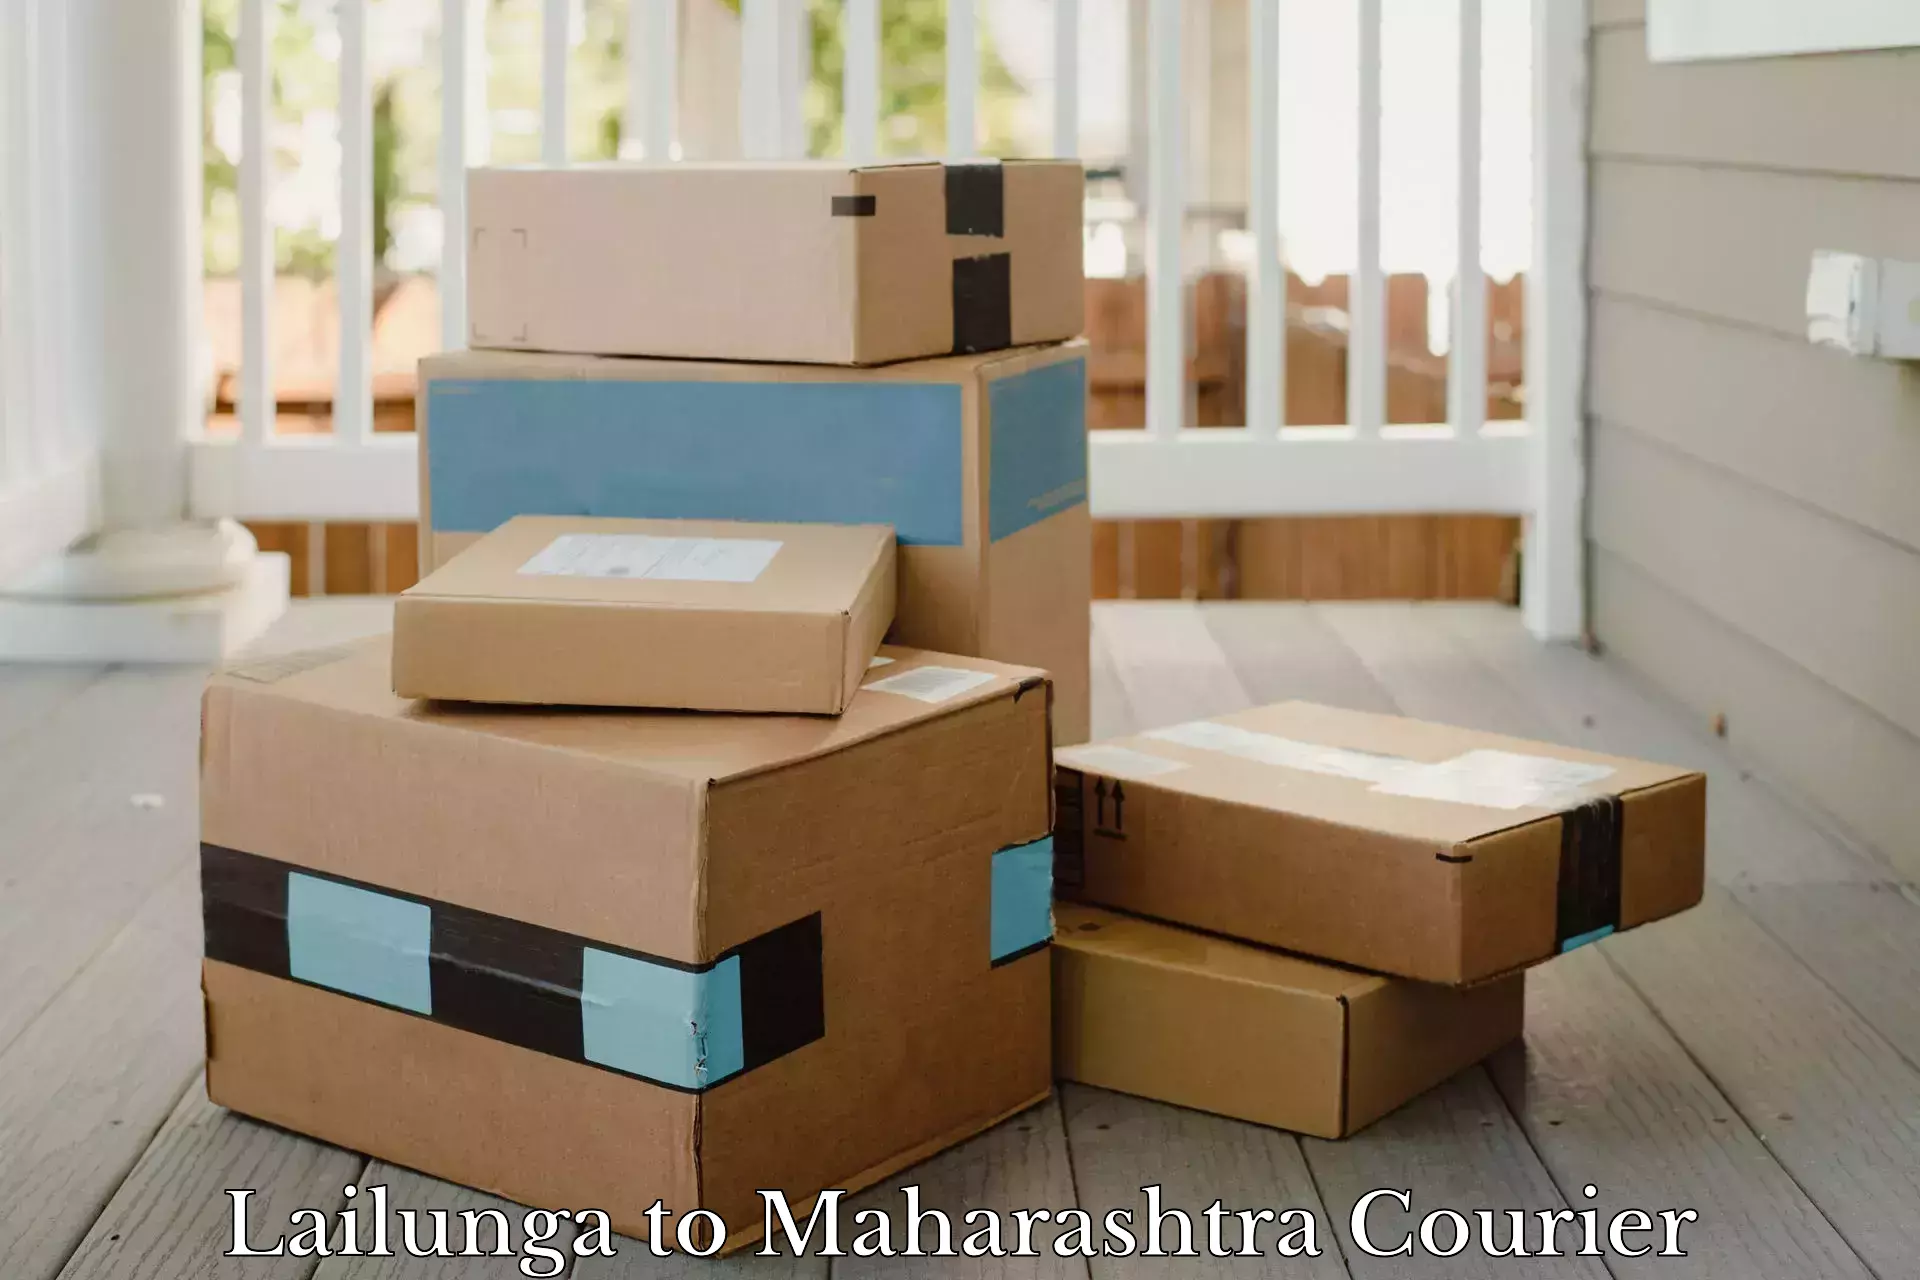 High-priority parcel service in Lailunga to Mahabaleshwar